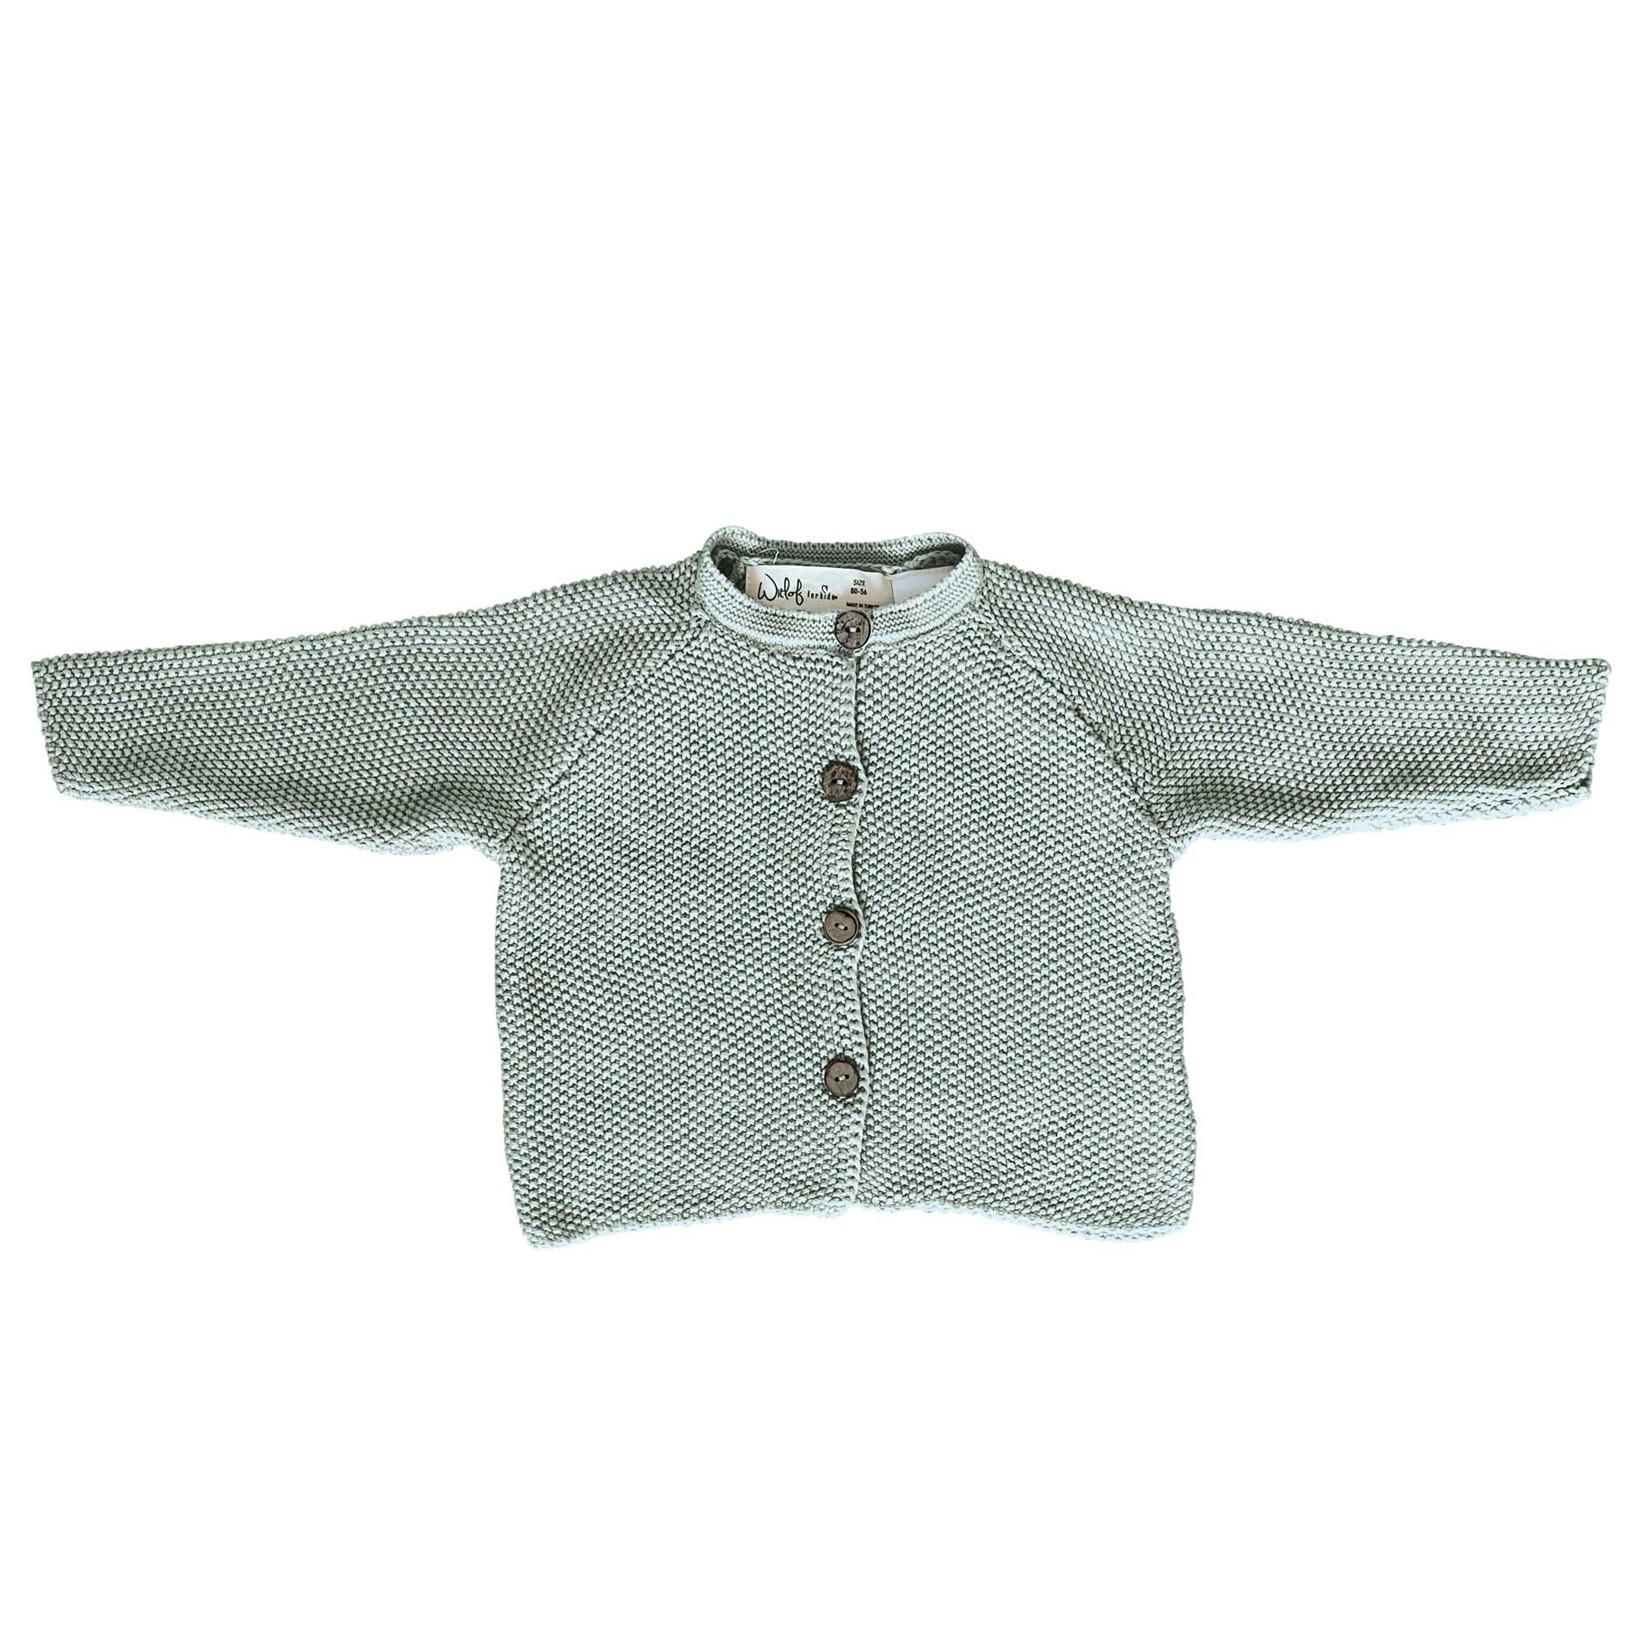 Witlof for kids Cardigan Knit Cloudy mint